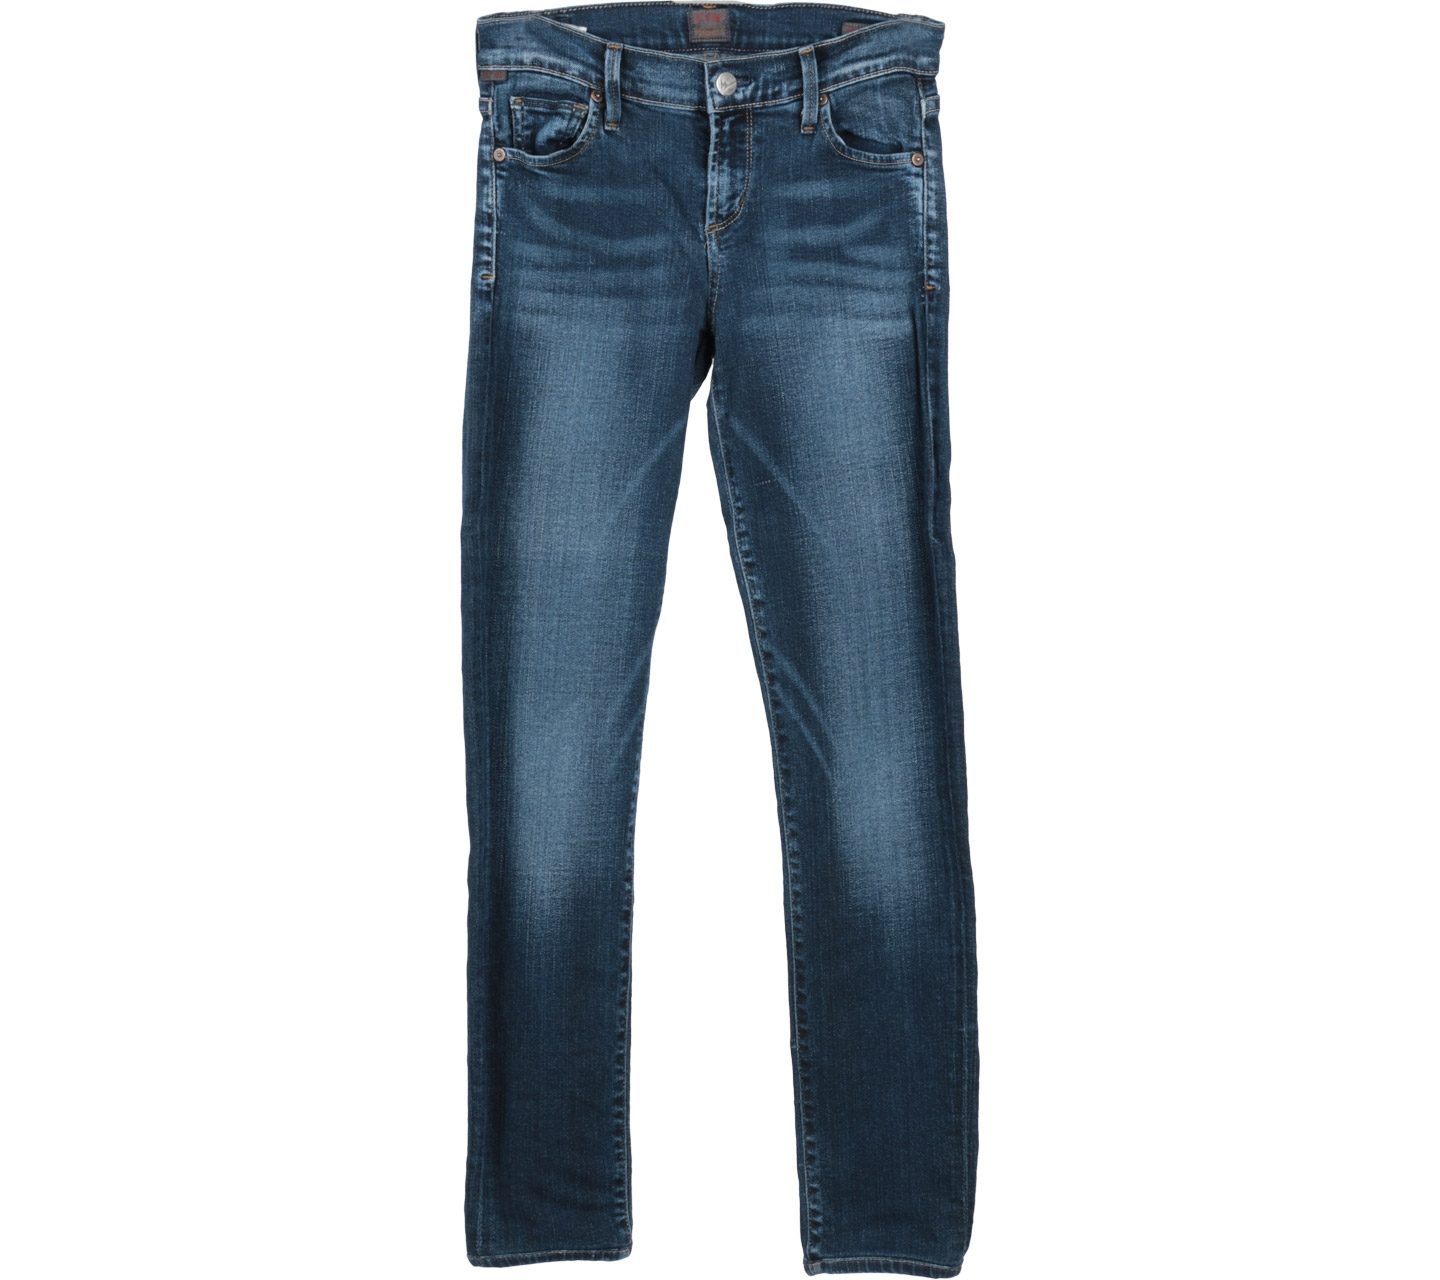 Citizens of Humanity Blue Washed Pants